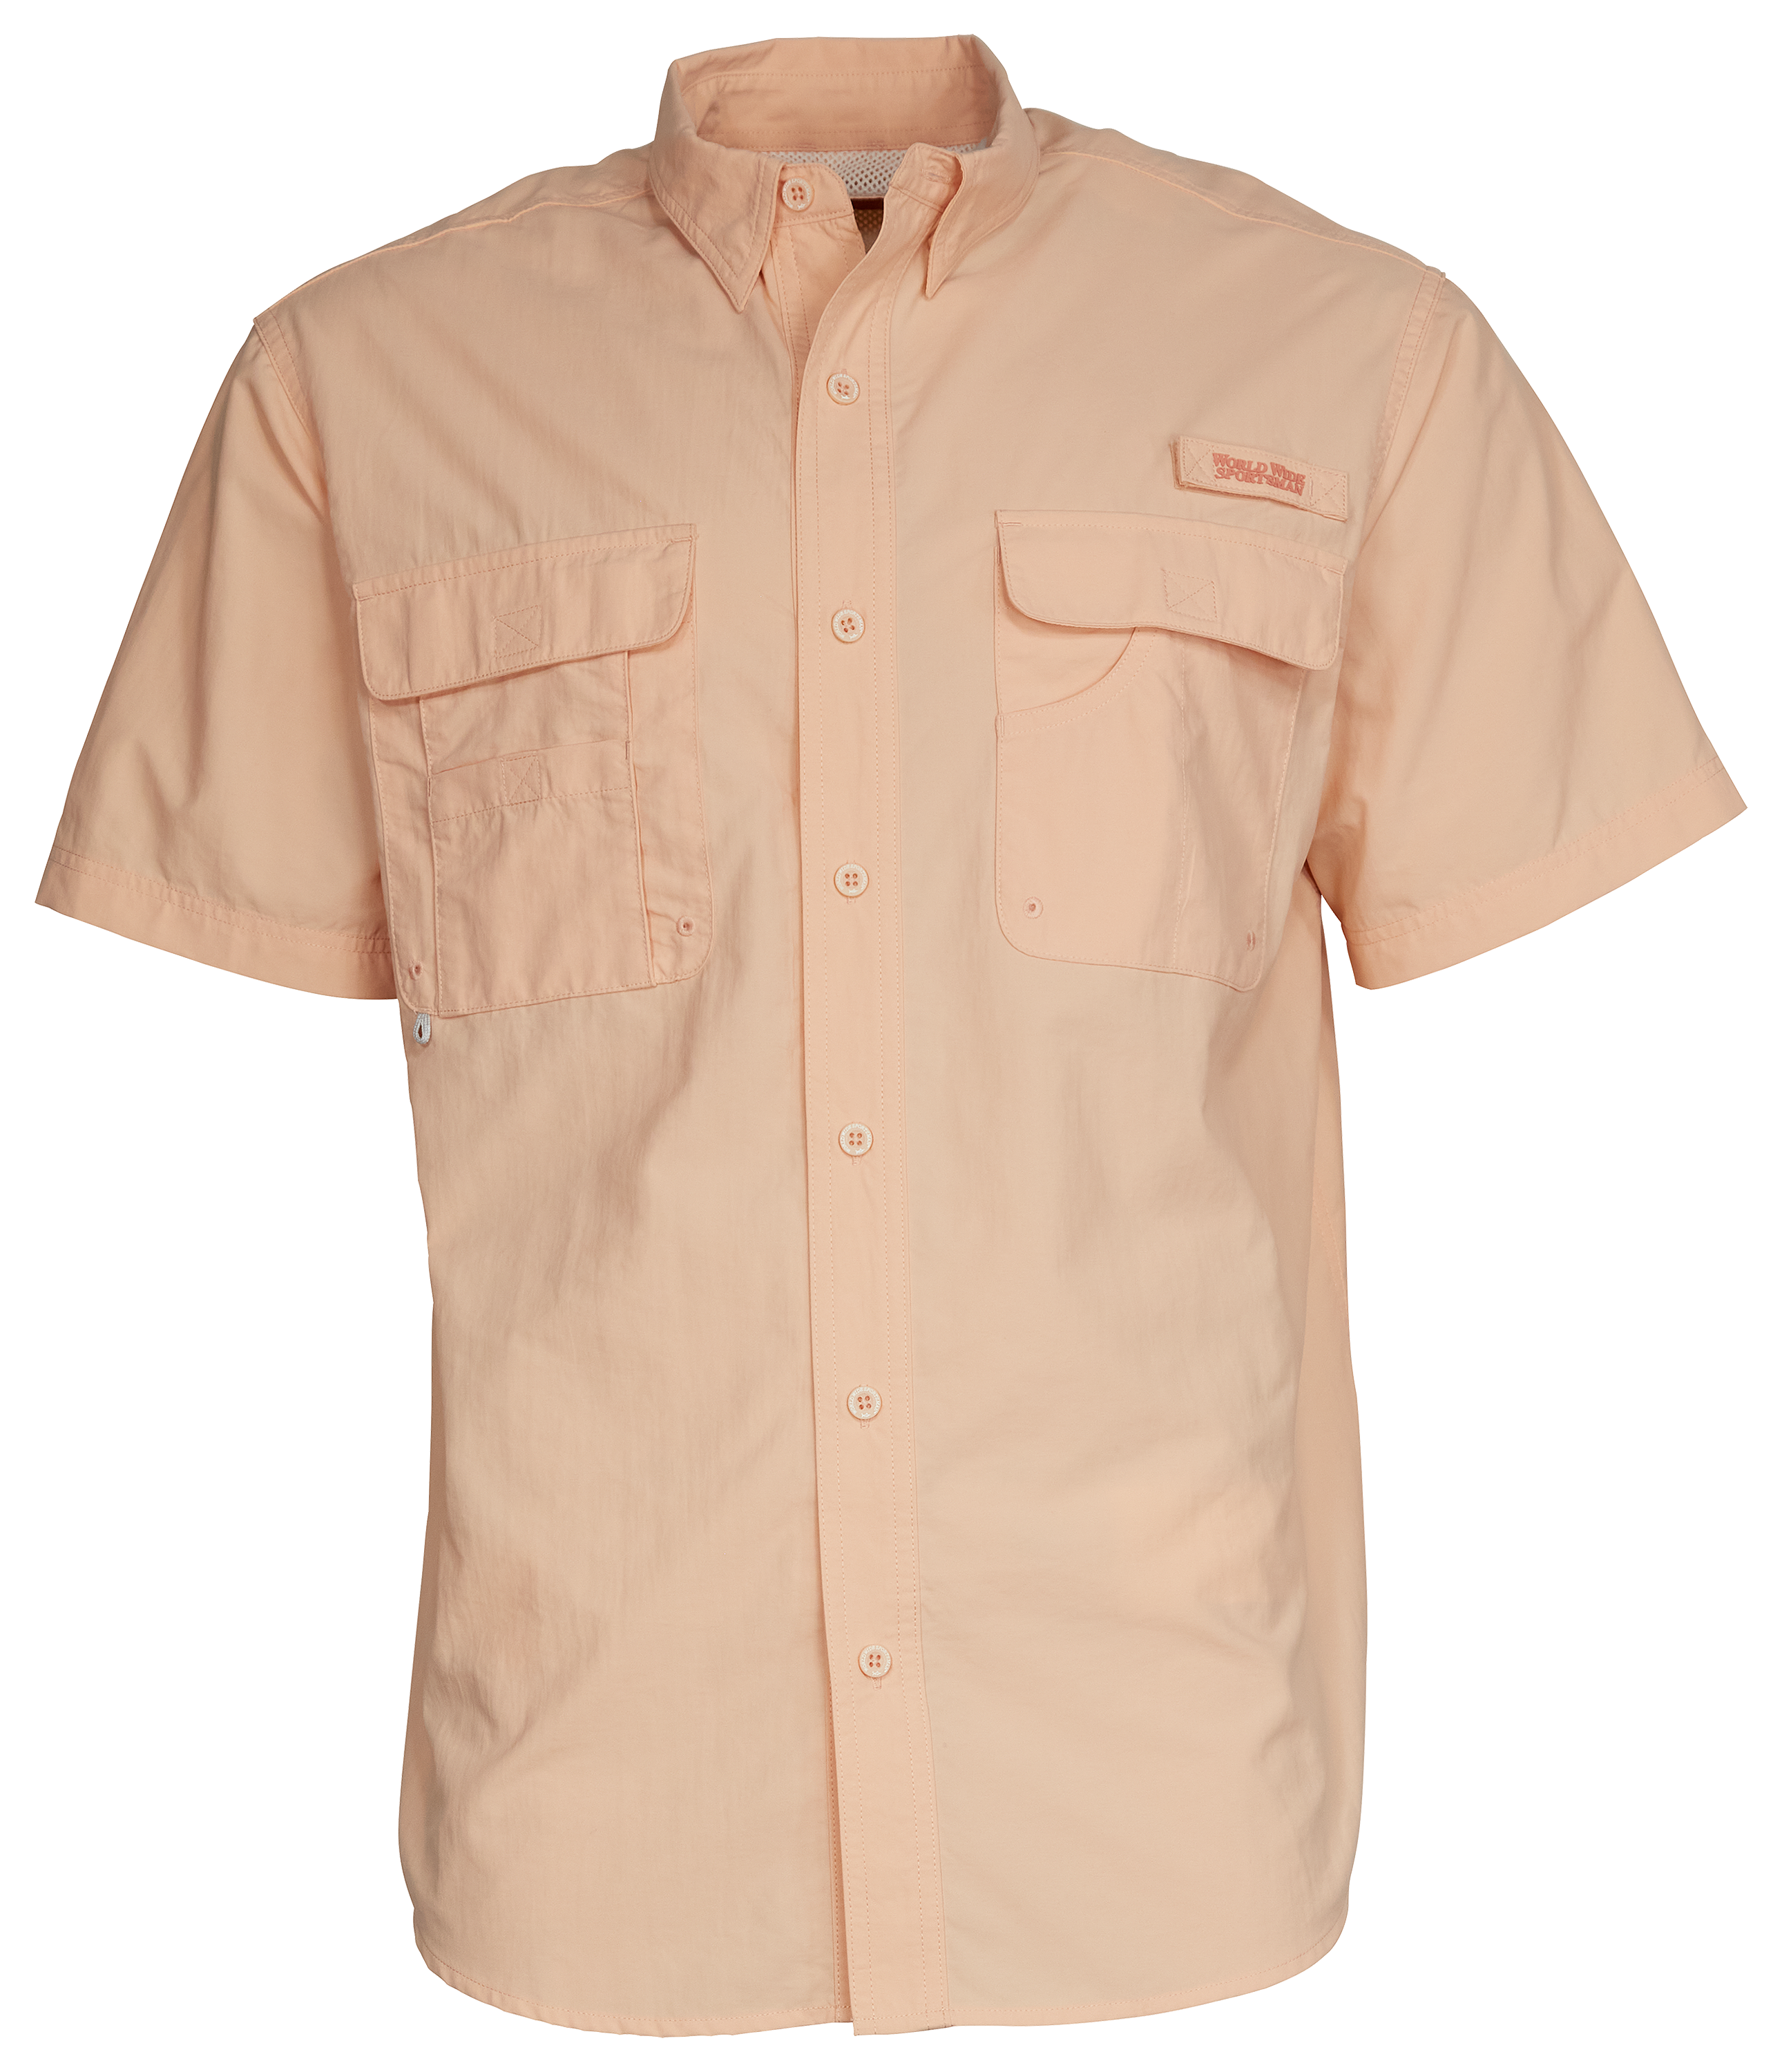 World Wide Sportsman Recycled-Nylon Angler 2.0 Short-Sleeve Button-Down Shirt for Men - Almost Apricot - 4XL